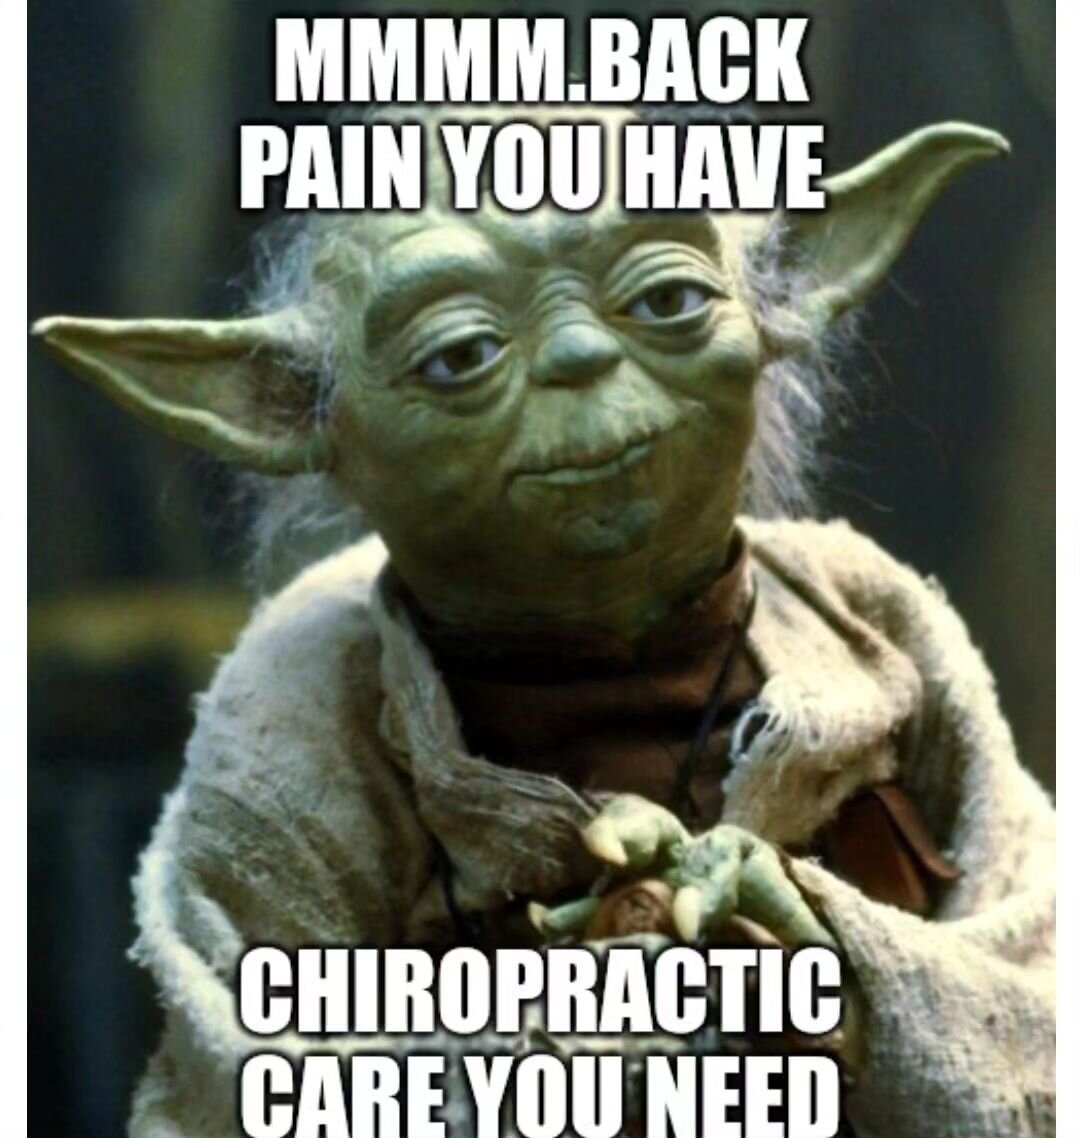 May the 4th is a great reminder of how strength and agility starts from within.
Take the first step to a better and pain free you. #letthehealingbegin
.
Visit any of our locations to find out the services we provide to support your painfree journey. 